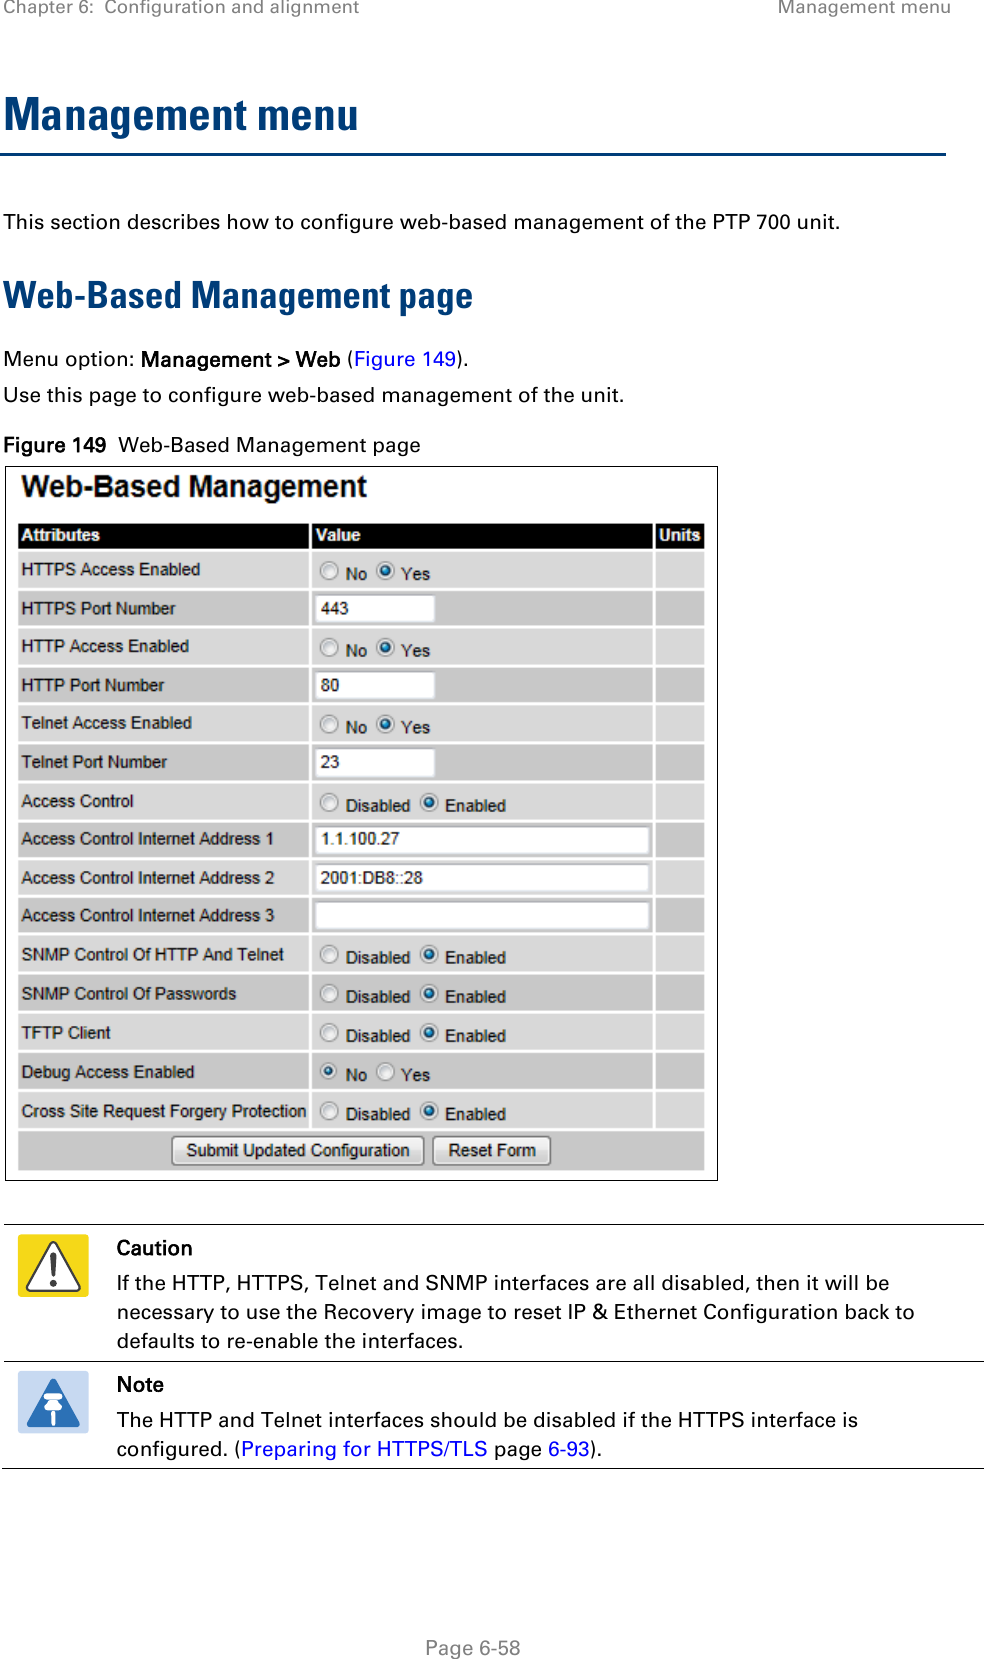 Chapter 6:  Configuration and alignment Management menu  Management menu This section describes how to configure web-based management of the PTP 700 unit. Web-Based Management page Menu option: Management &gt; Web (Figure 149). Use this page to configure web-based management of the unit. Figure 149  Web-Based Management page    Caution If the HTTP, HTTPS, Telnet and SNMP interfaces are all disabled, then it will be necessary to use the Recovery image to reset IP &amp; Ethernet Configuration back to defaults to re-enable the interfaces.  Note The HTTP and Telnet interfaces should be disabled if the HTTPS interface is configured. (Preparing for HTTPS/TLS page 6-93).   Page 6-58 